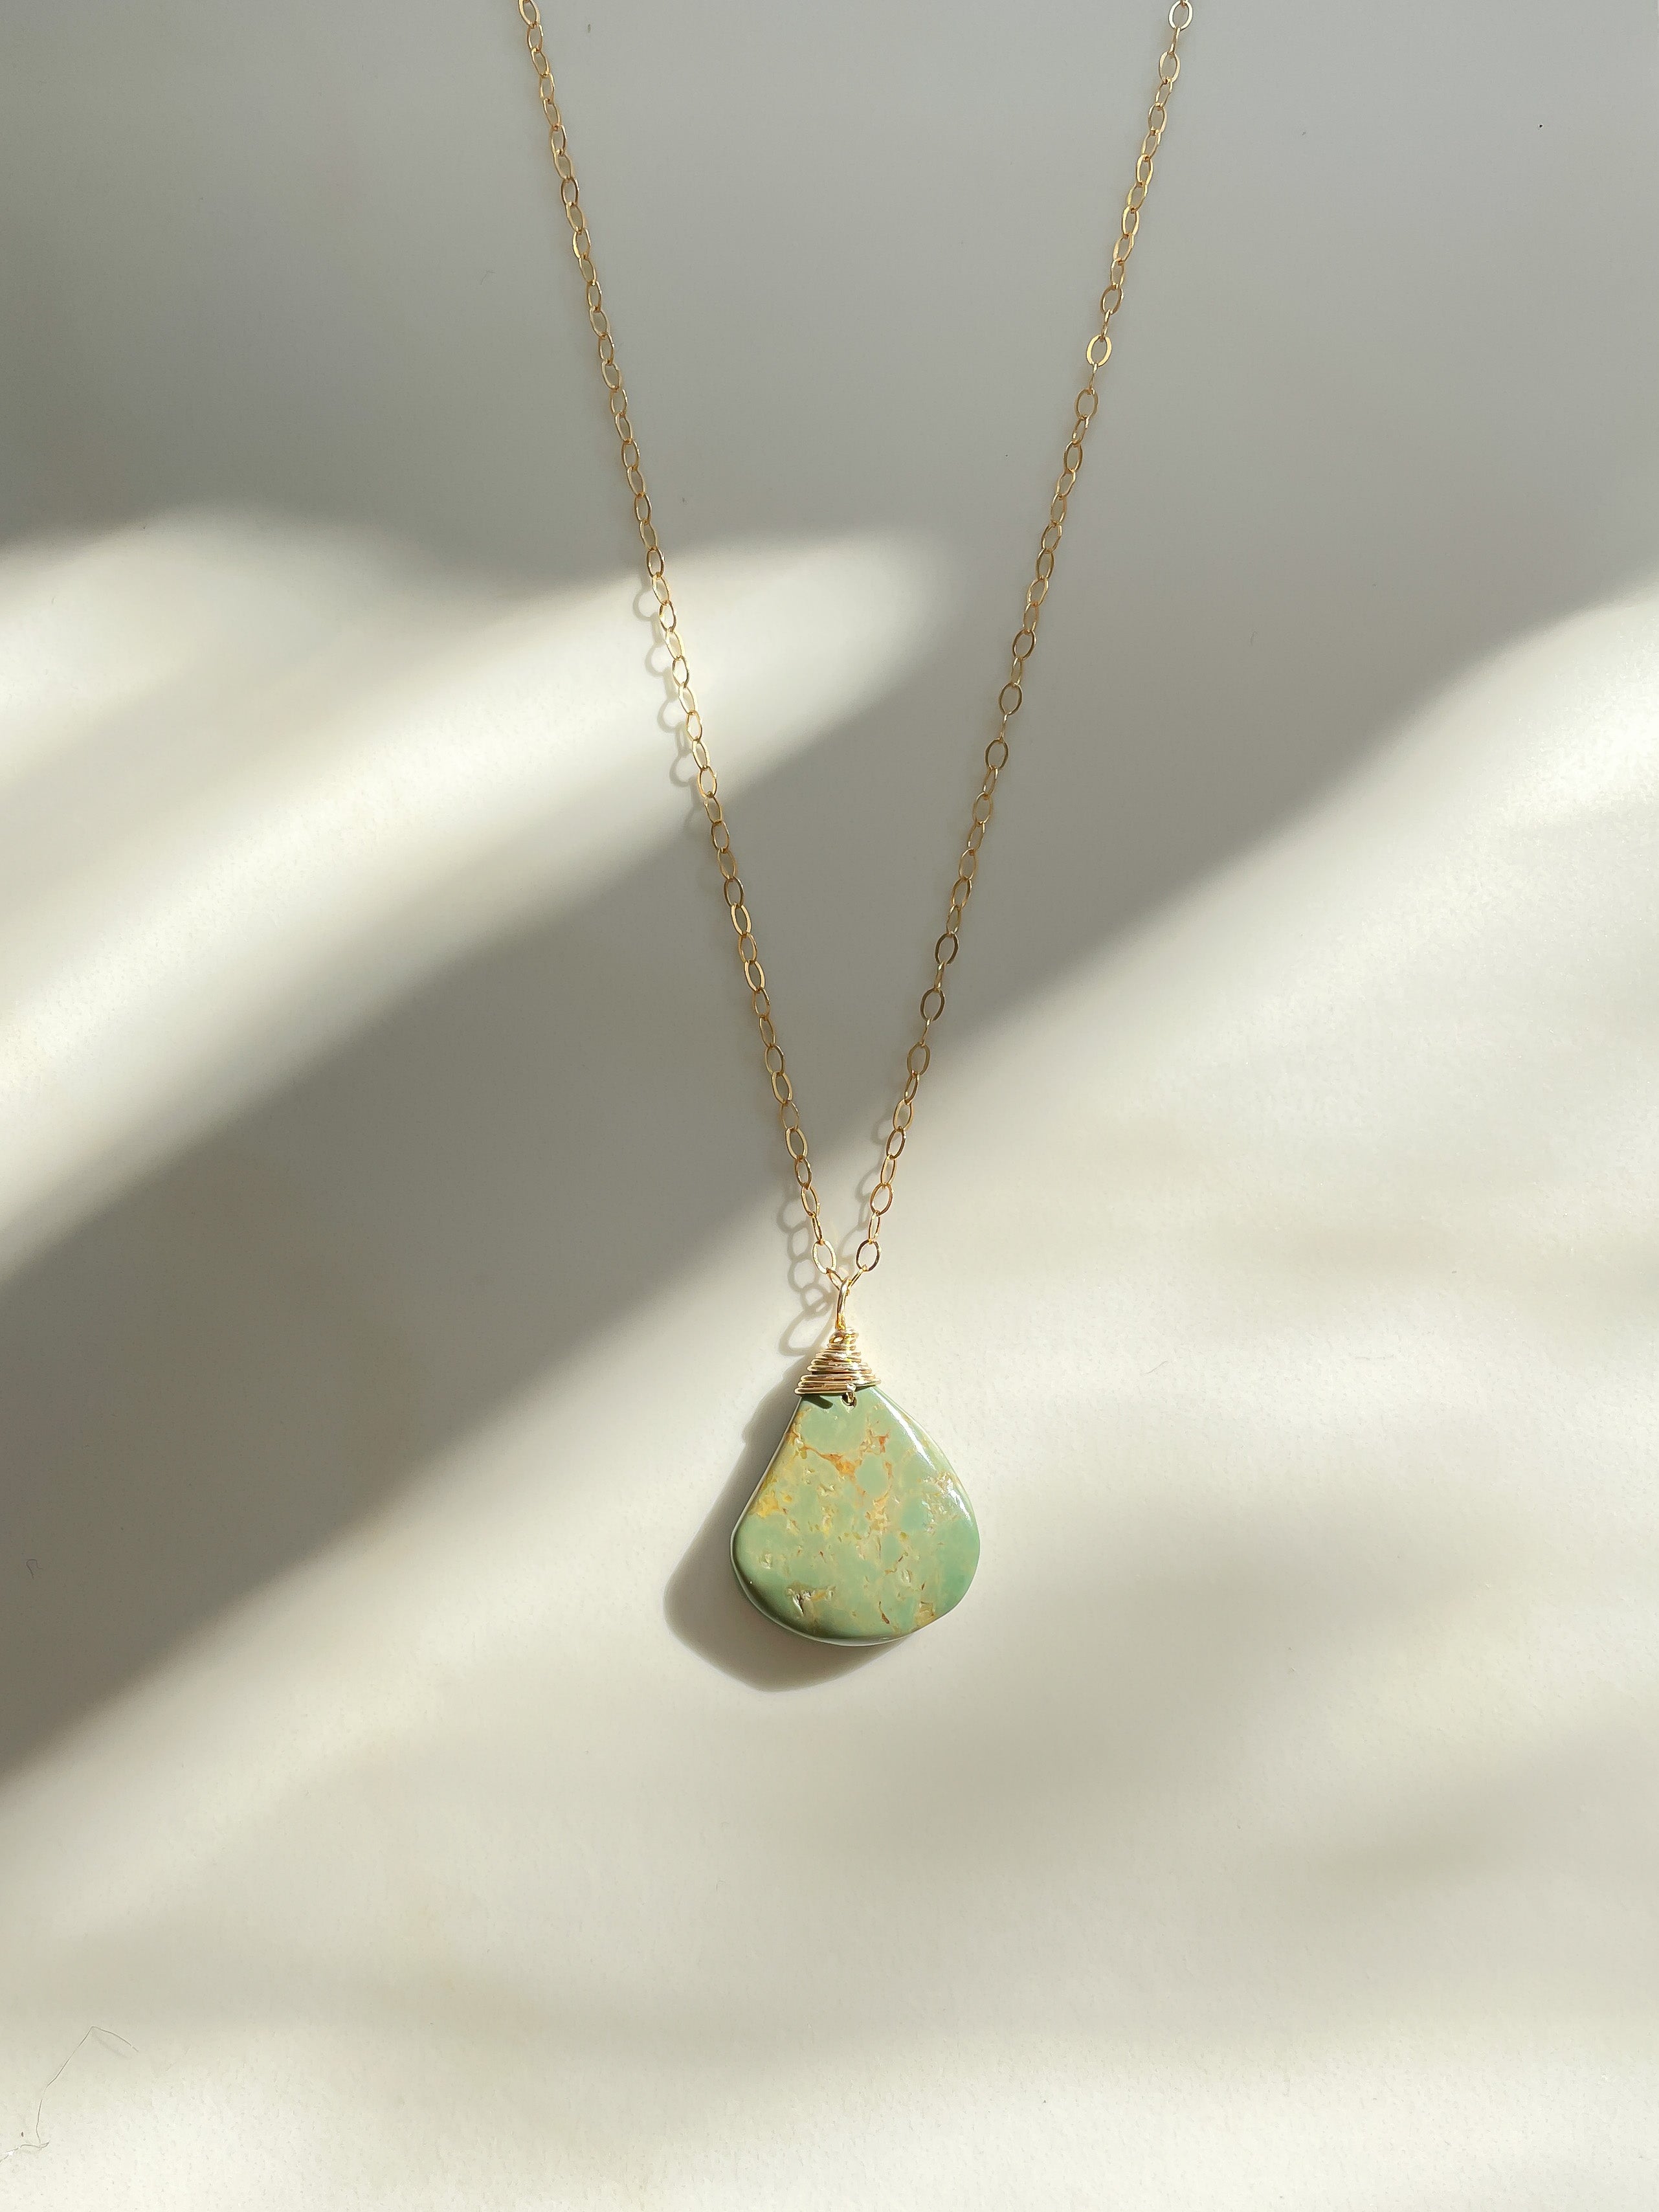 The Quaking Aspen Leaf Turquoise Necklace